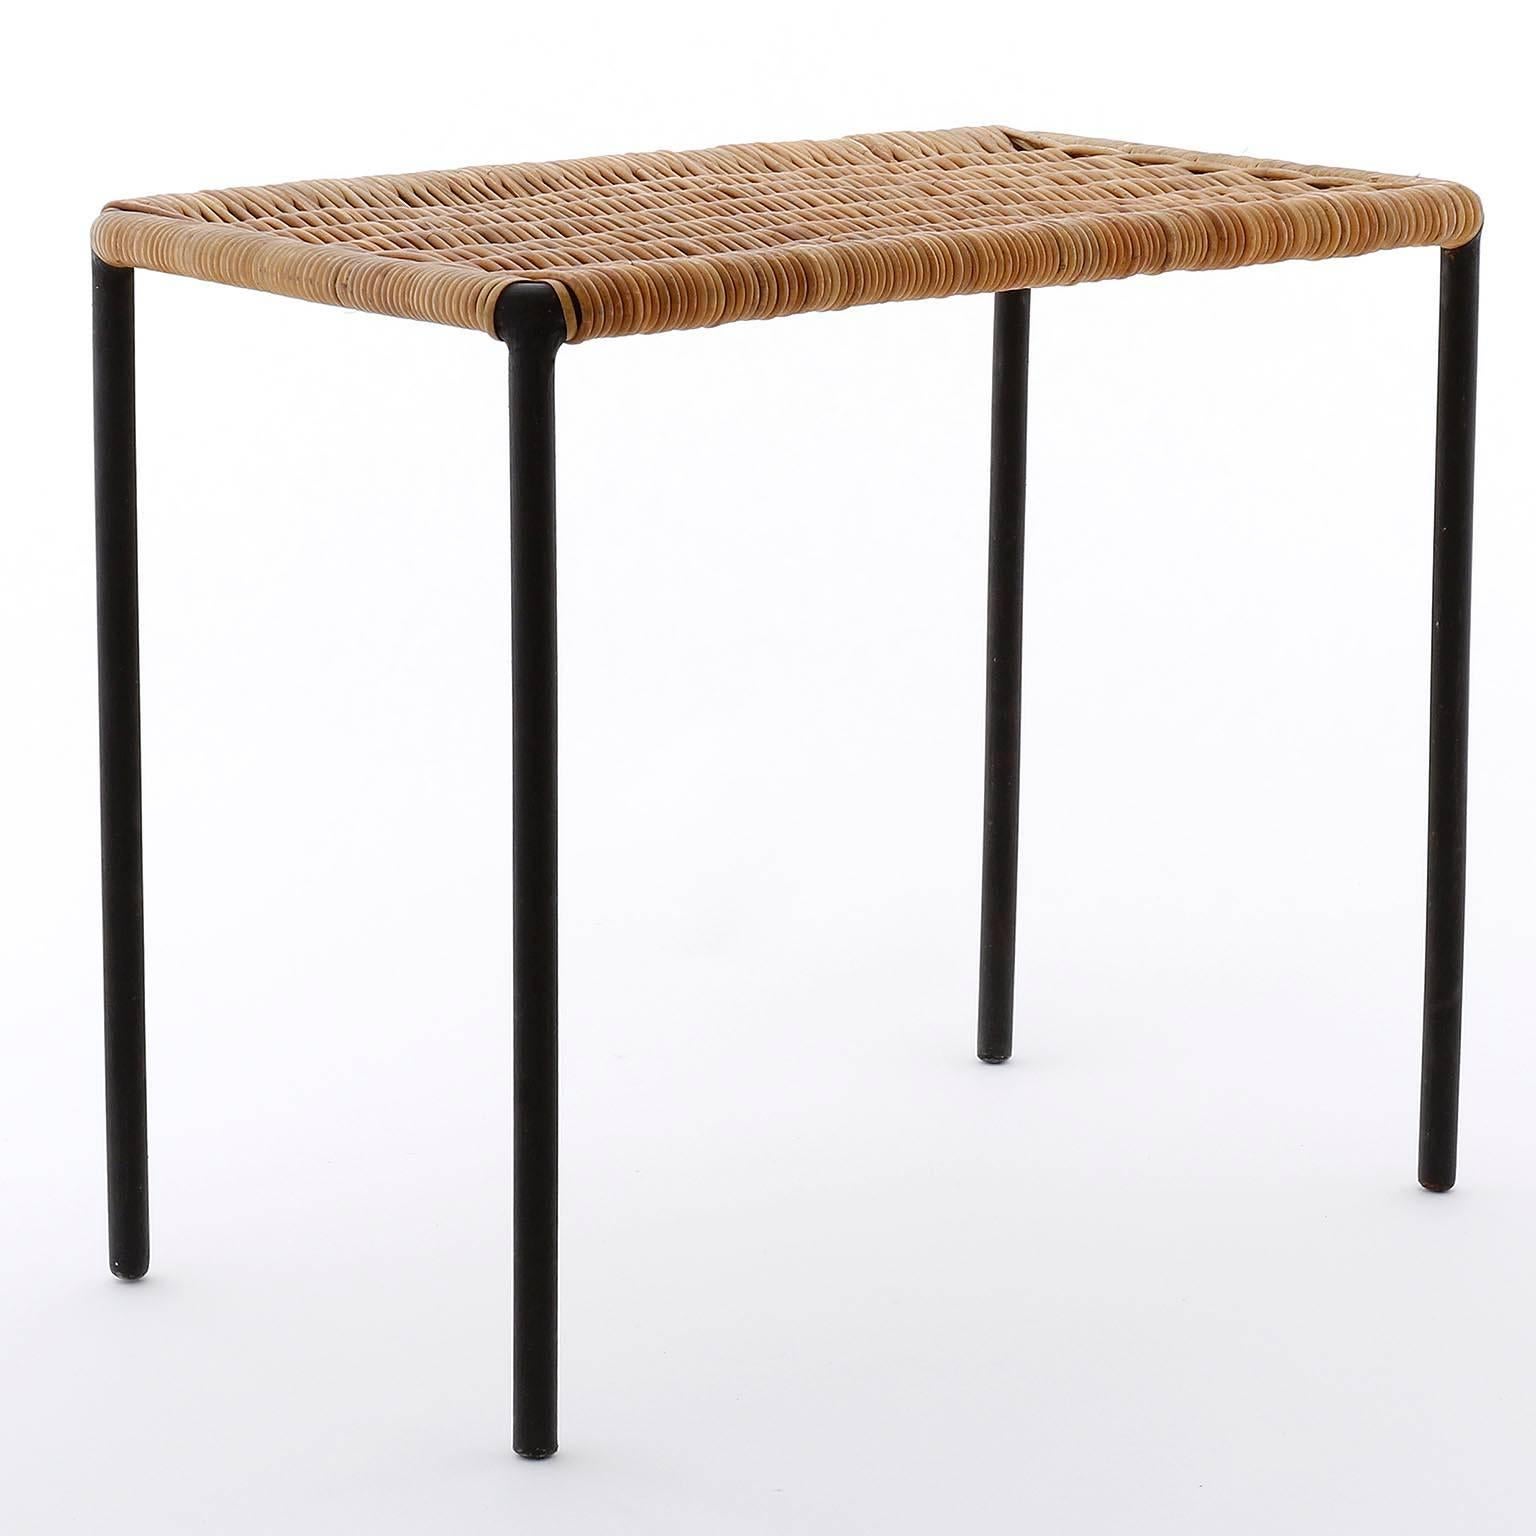 A rectangular wicker top side table by Carl Auboeck, Vienna, manufactured in Mid-century, circa 1950.
The frame is made of slim steel bars painted in black. The tabletop is in excellent and original condition made of tightly woven wicker.
An